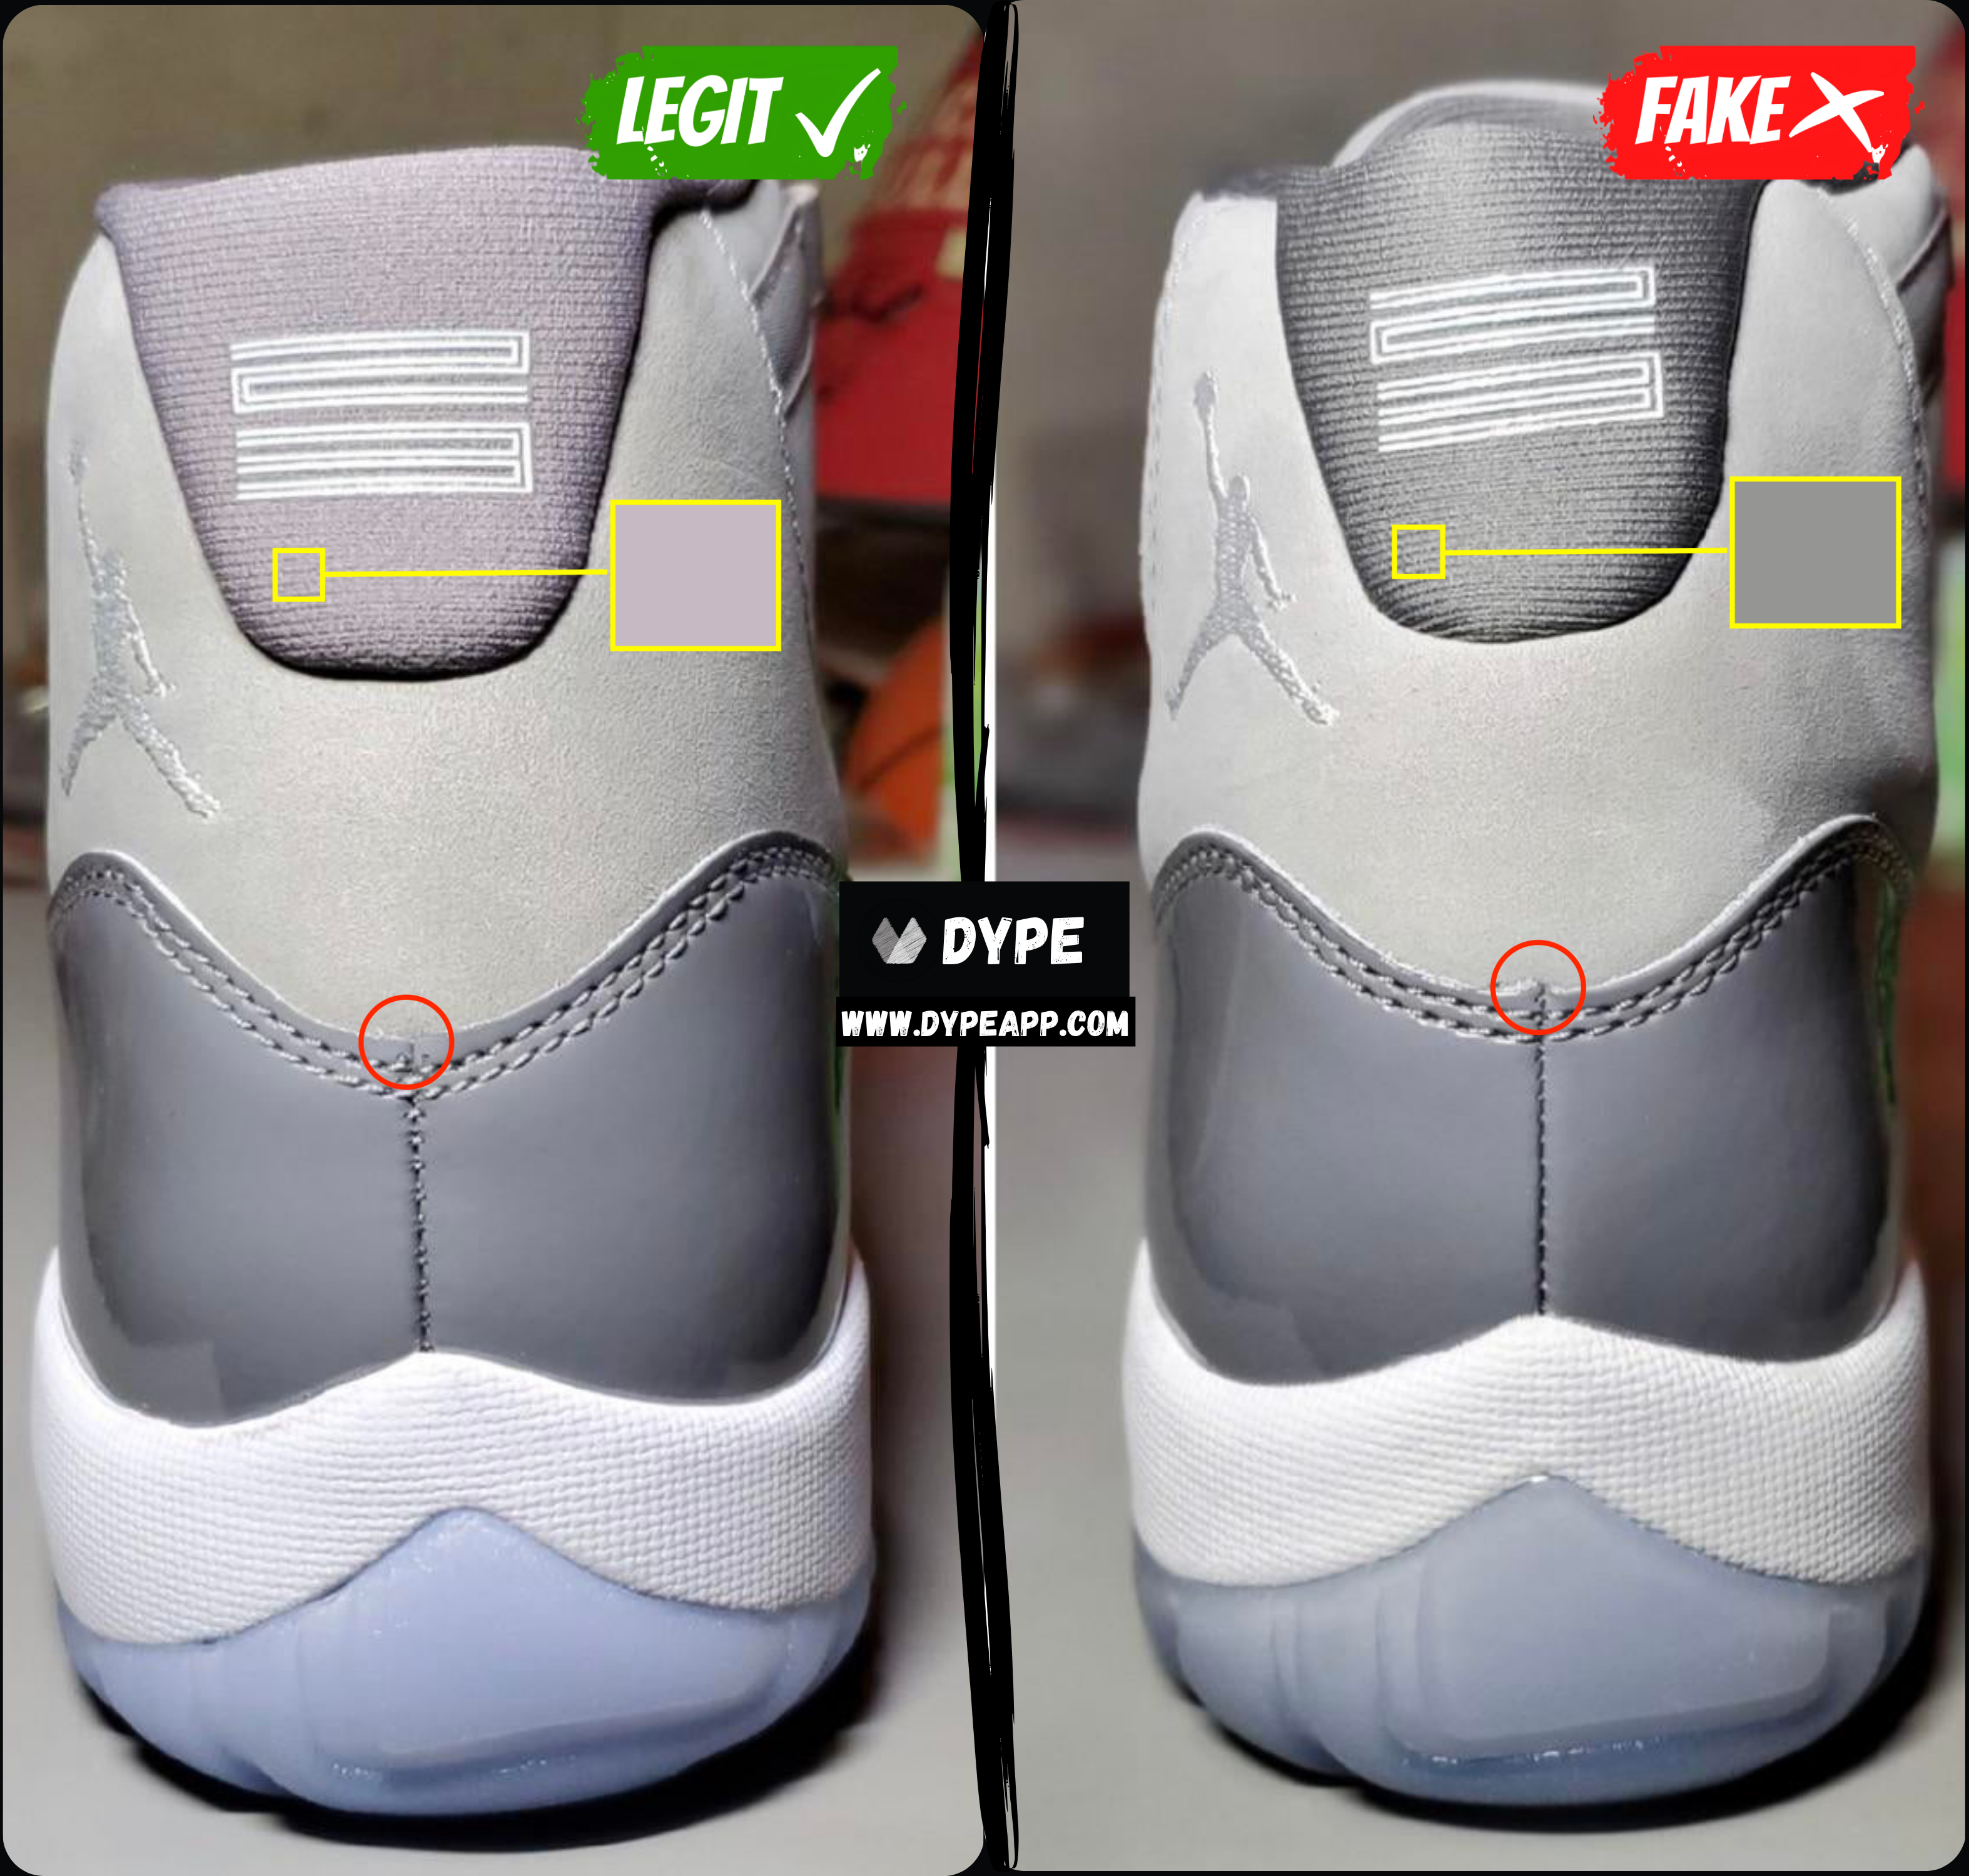 how can you tell if the jordan 11s are fake